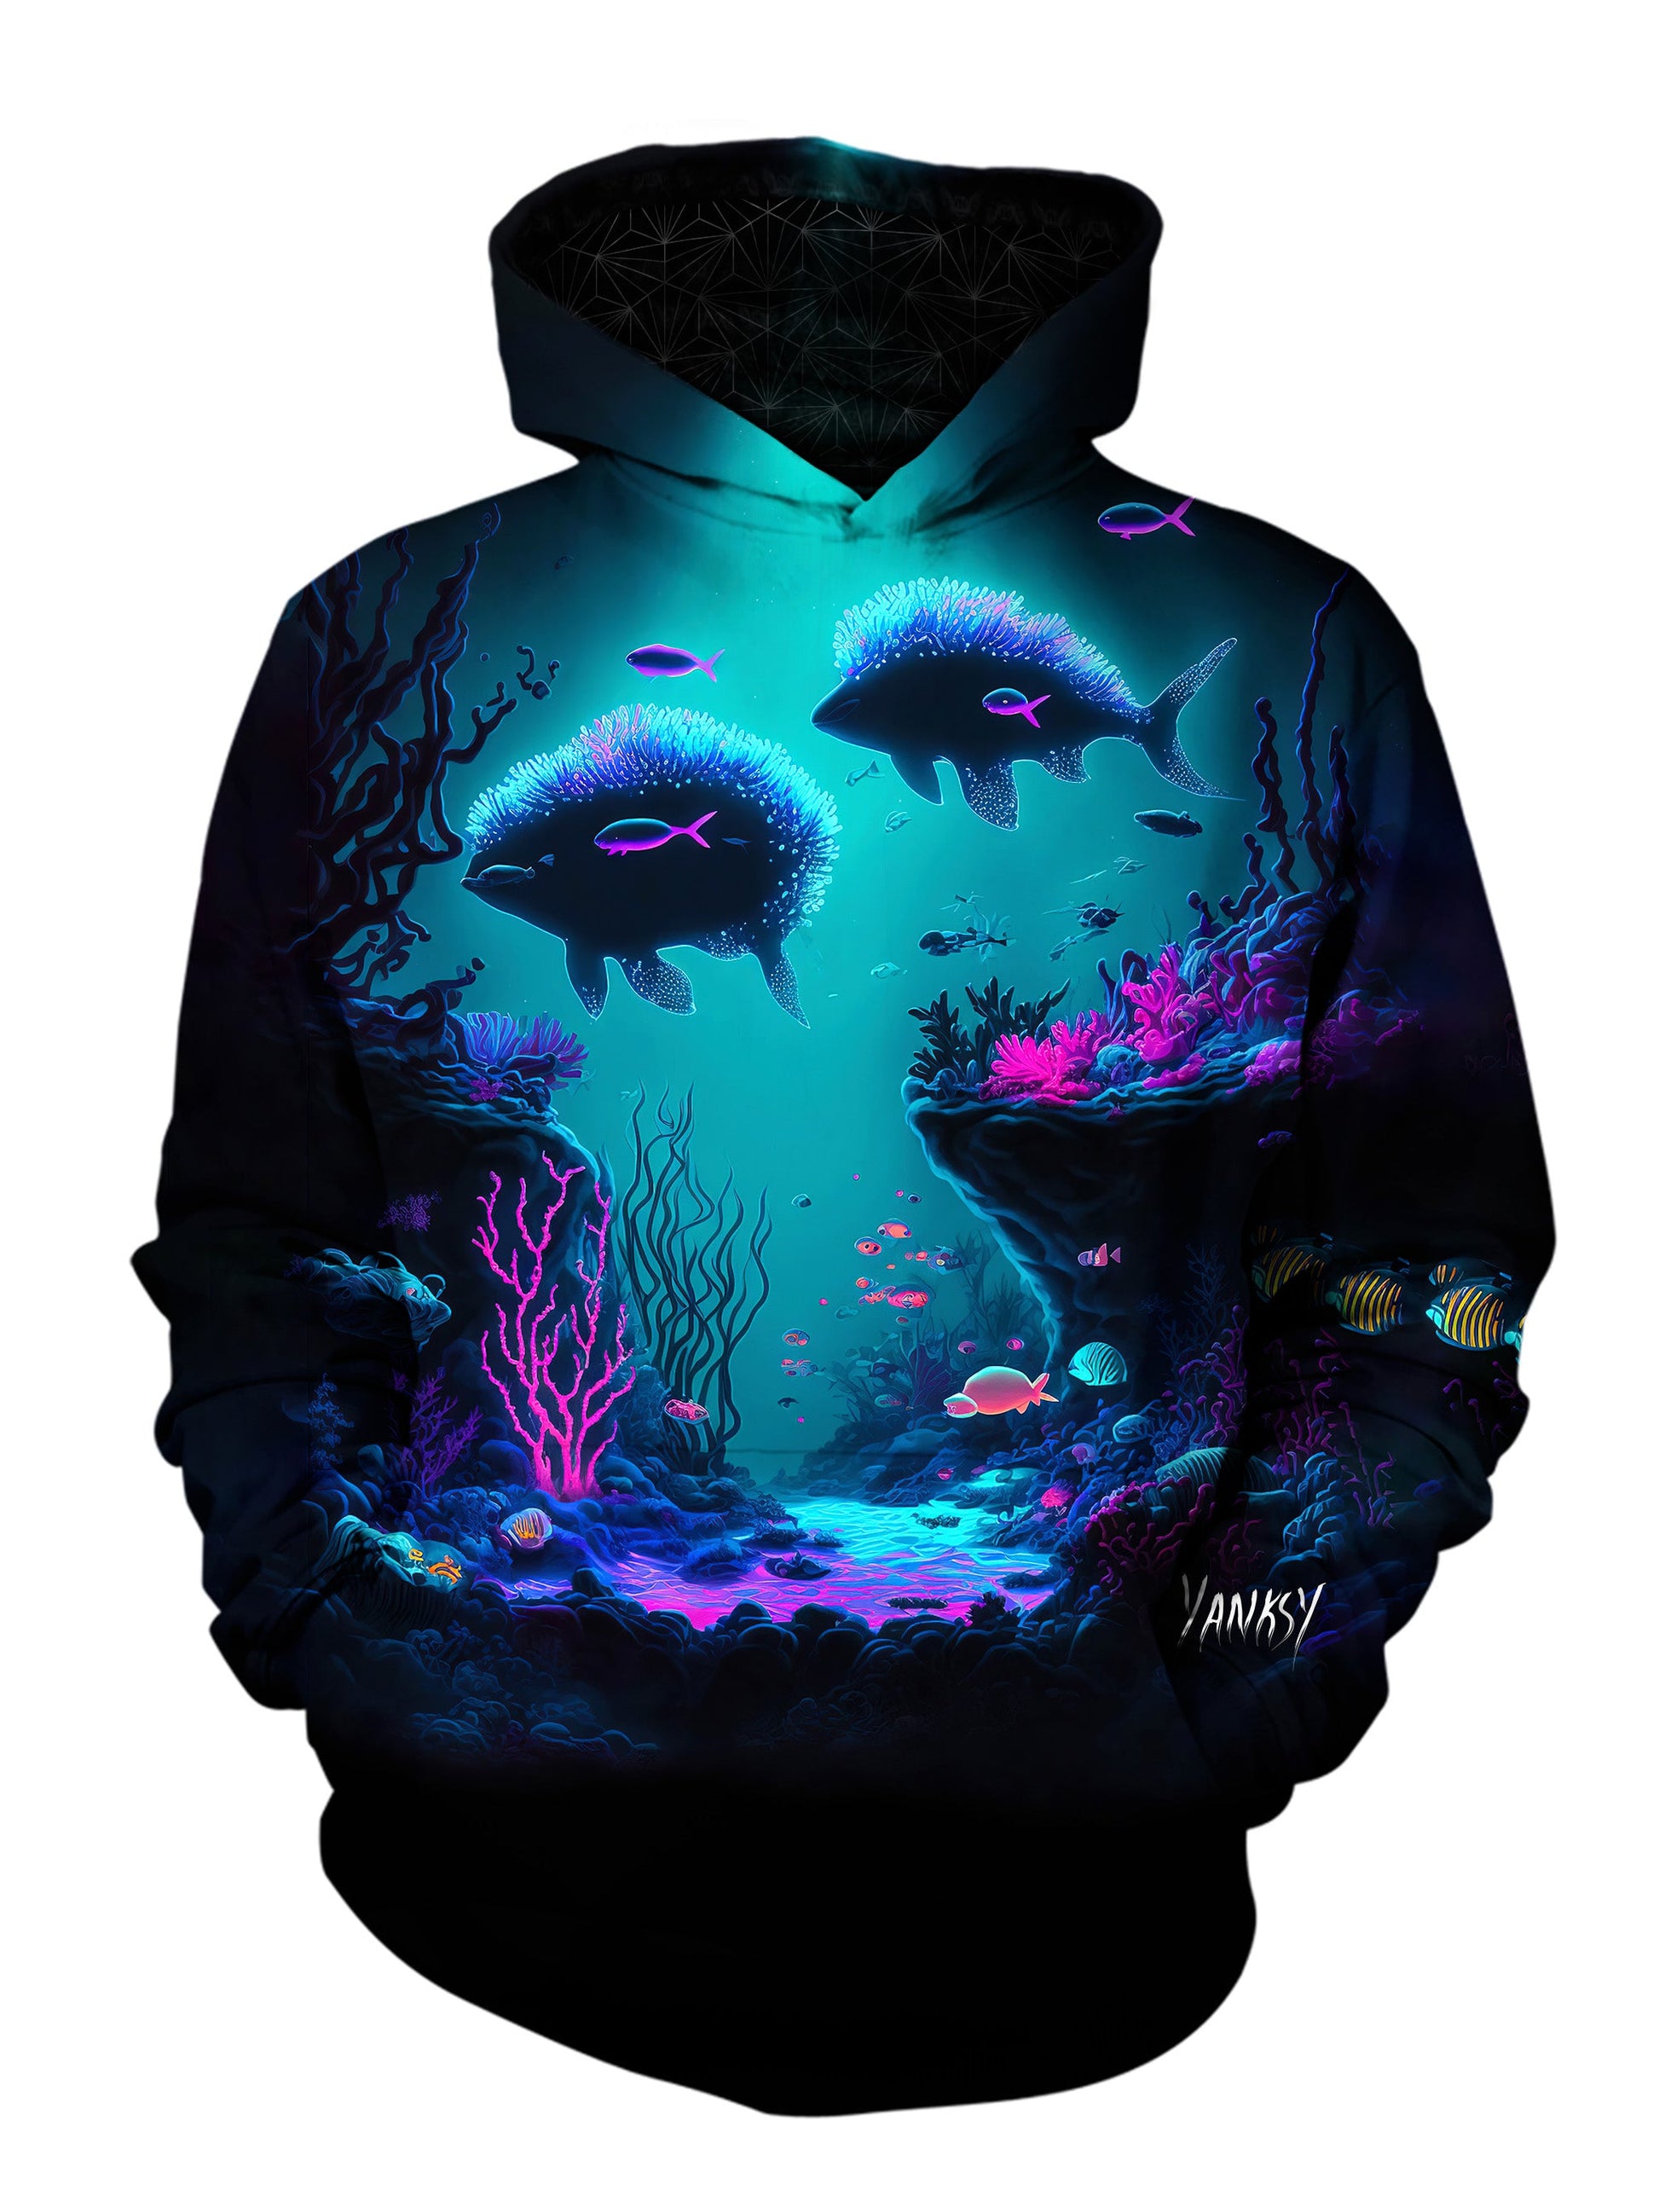 Get ready to party in comfort and style with this pullover hoodie